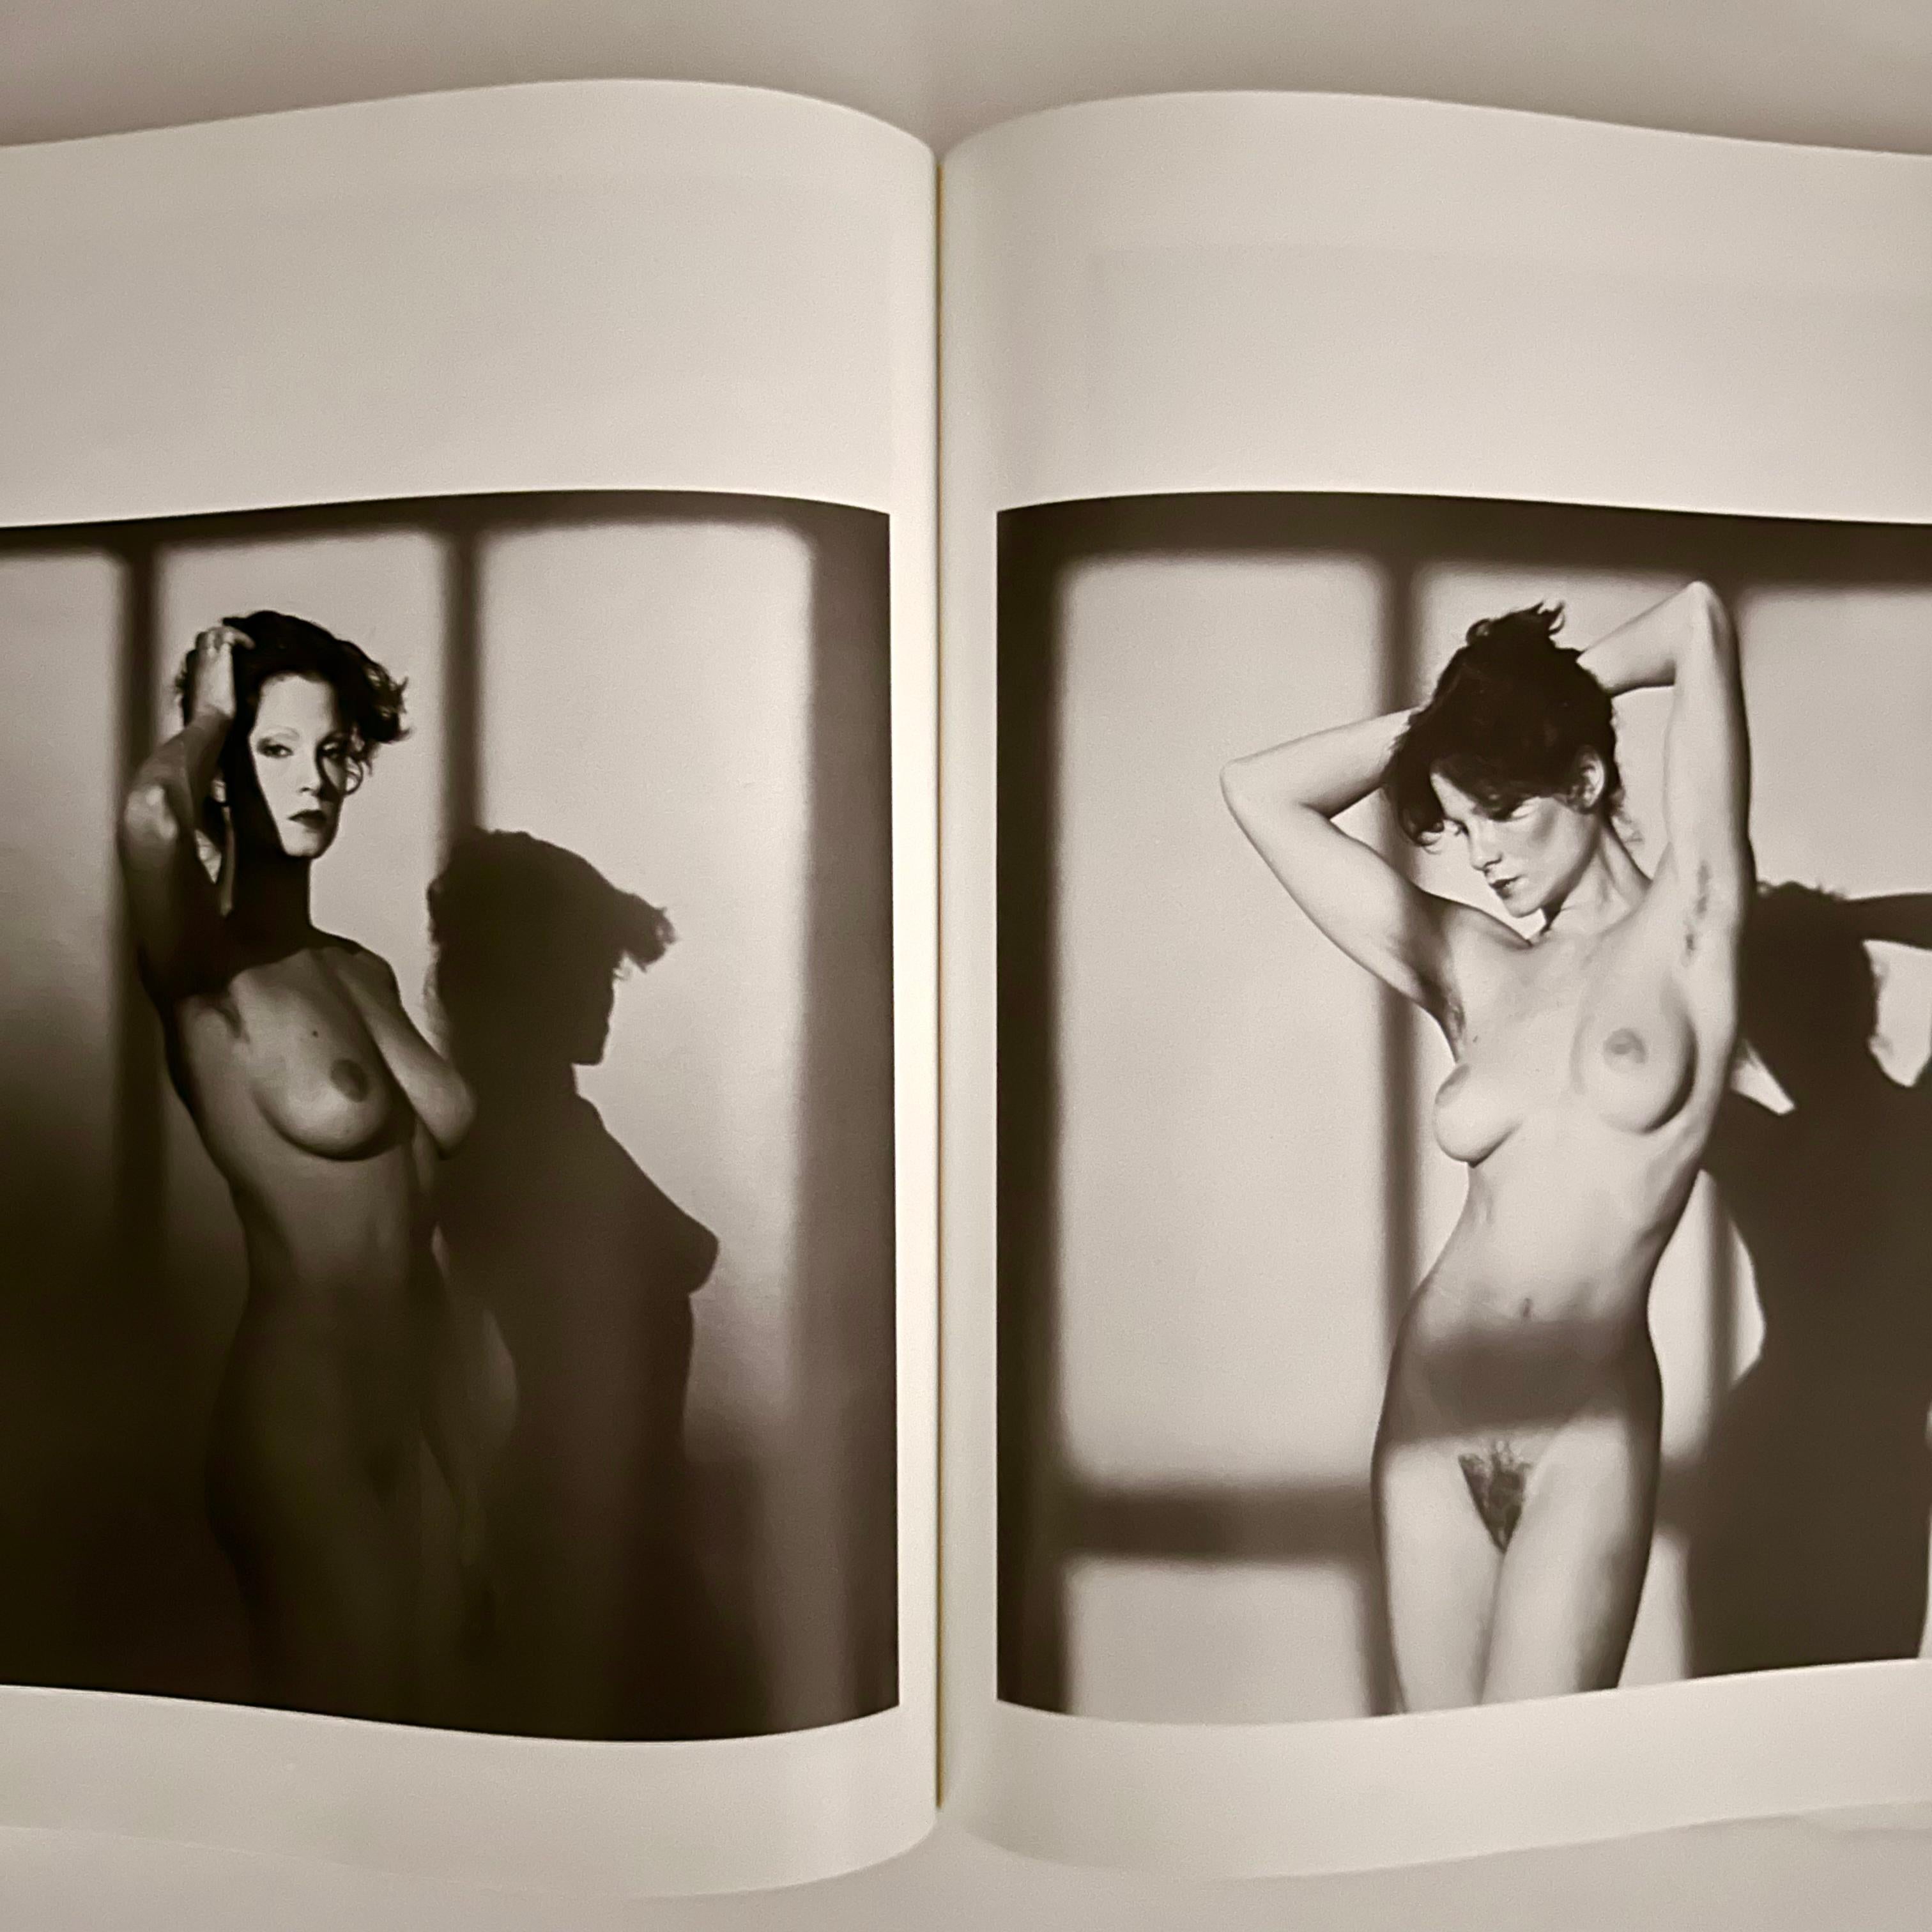 Published by Blond & Briggs Ltd. 1st edition 1983 softcover English text.

This provocative book documents the collaboration between Lady Lisa Lyon and Mapplethorpe. Lady Lisa Lyon was an American bodybuilder and this book took a whirlwind tour of